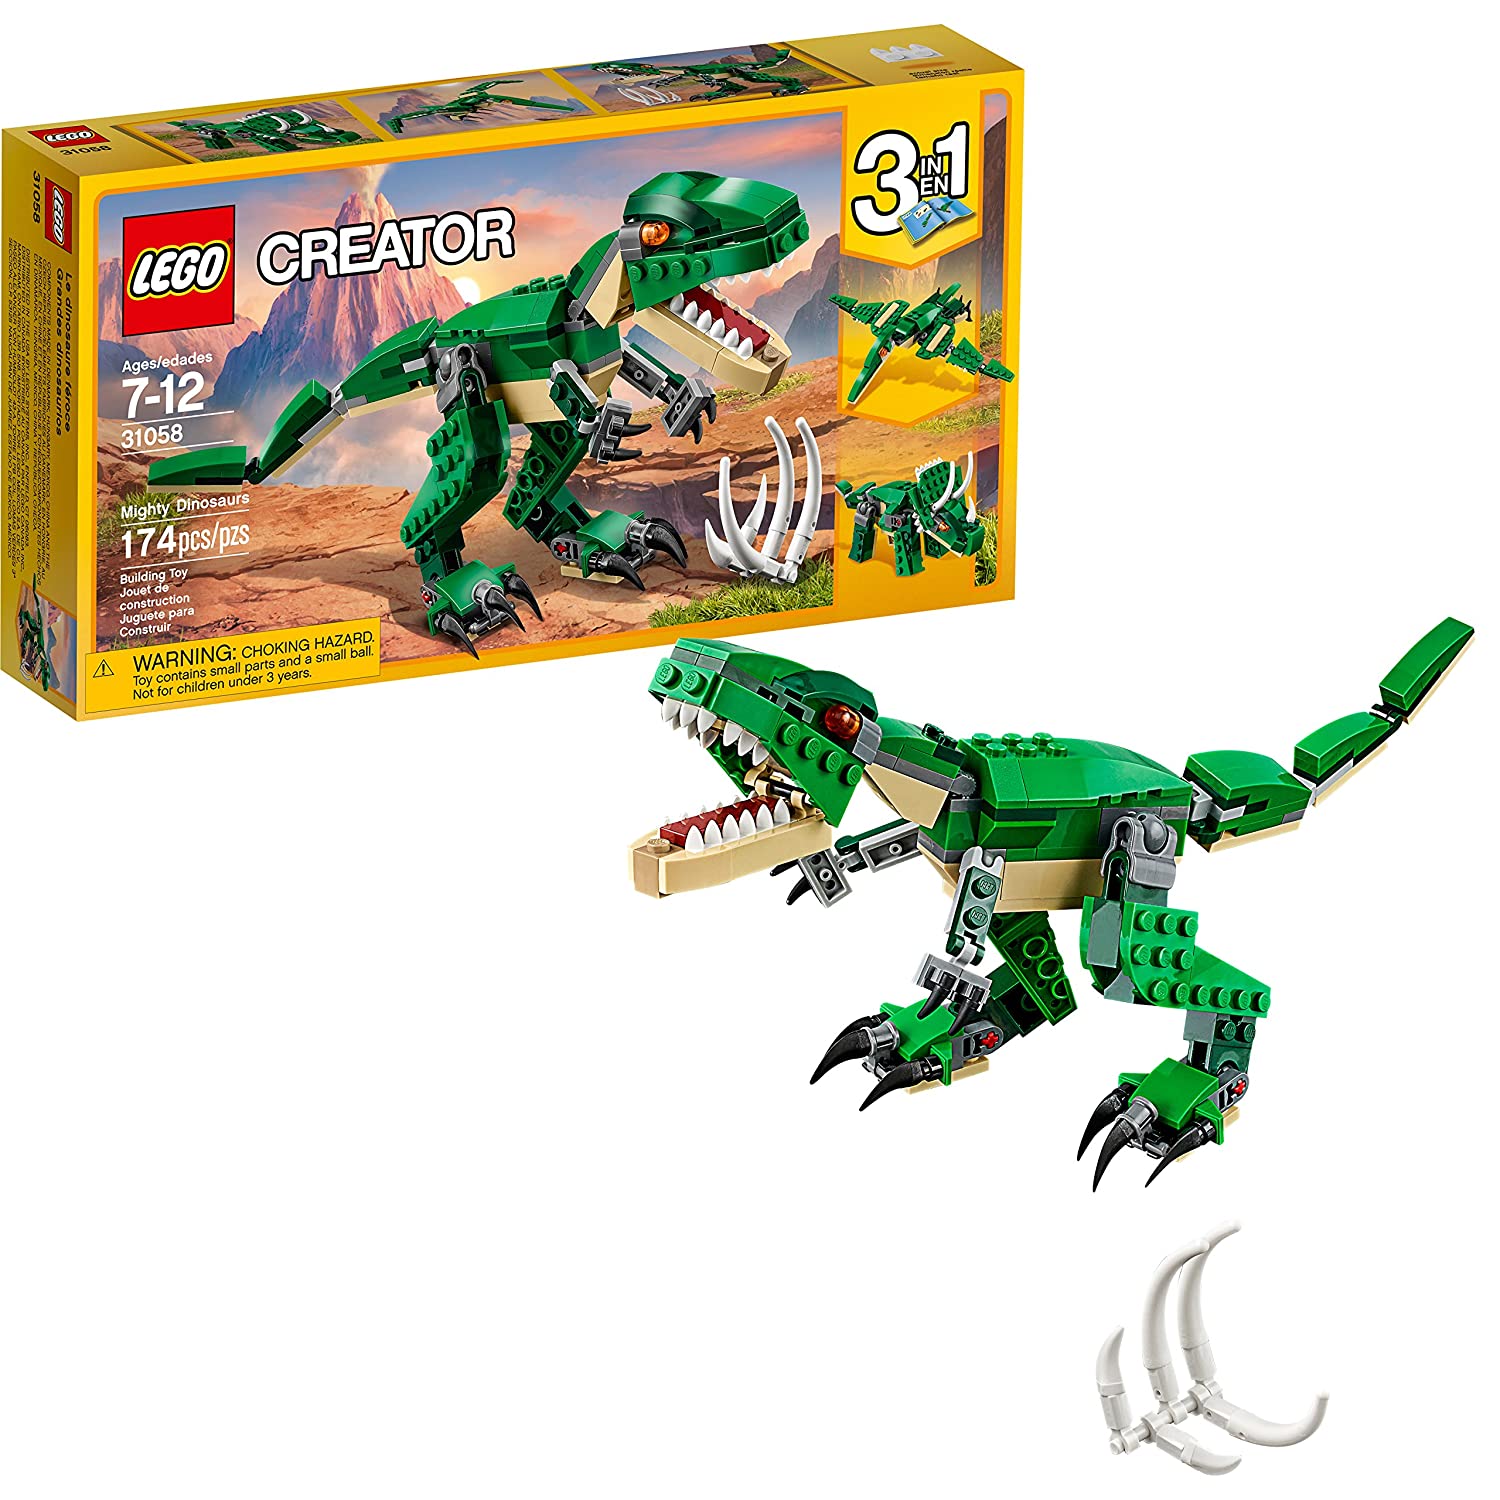 Top 8 Best Lego Dinosaurs Set Reviews in 2023 1